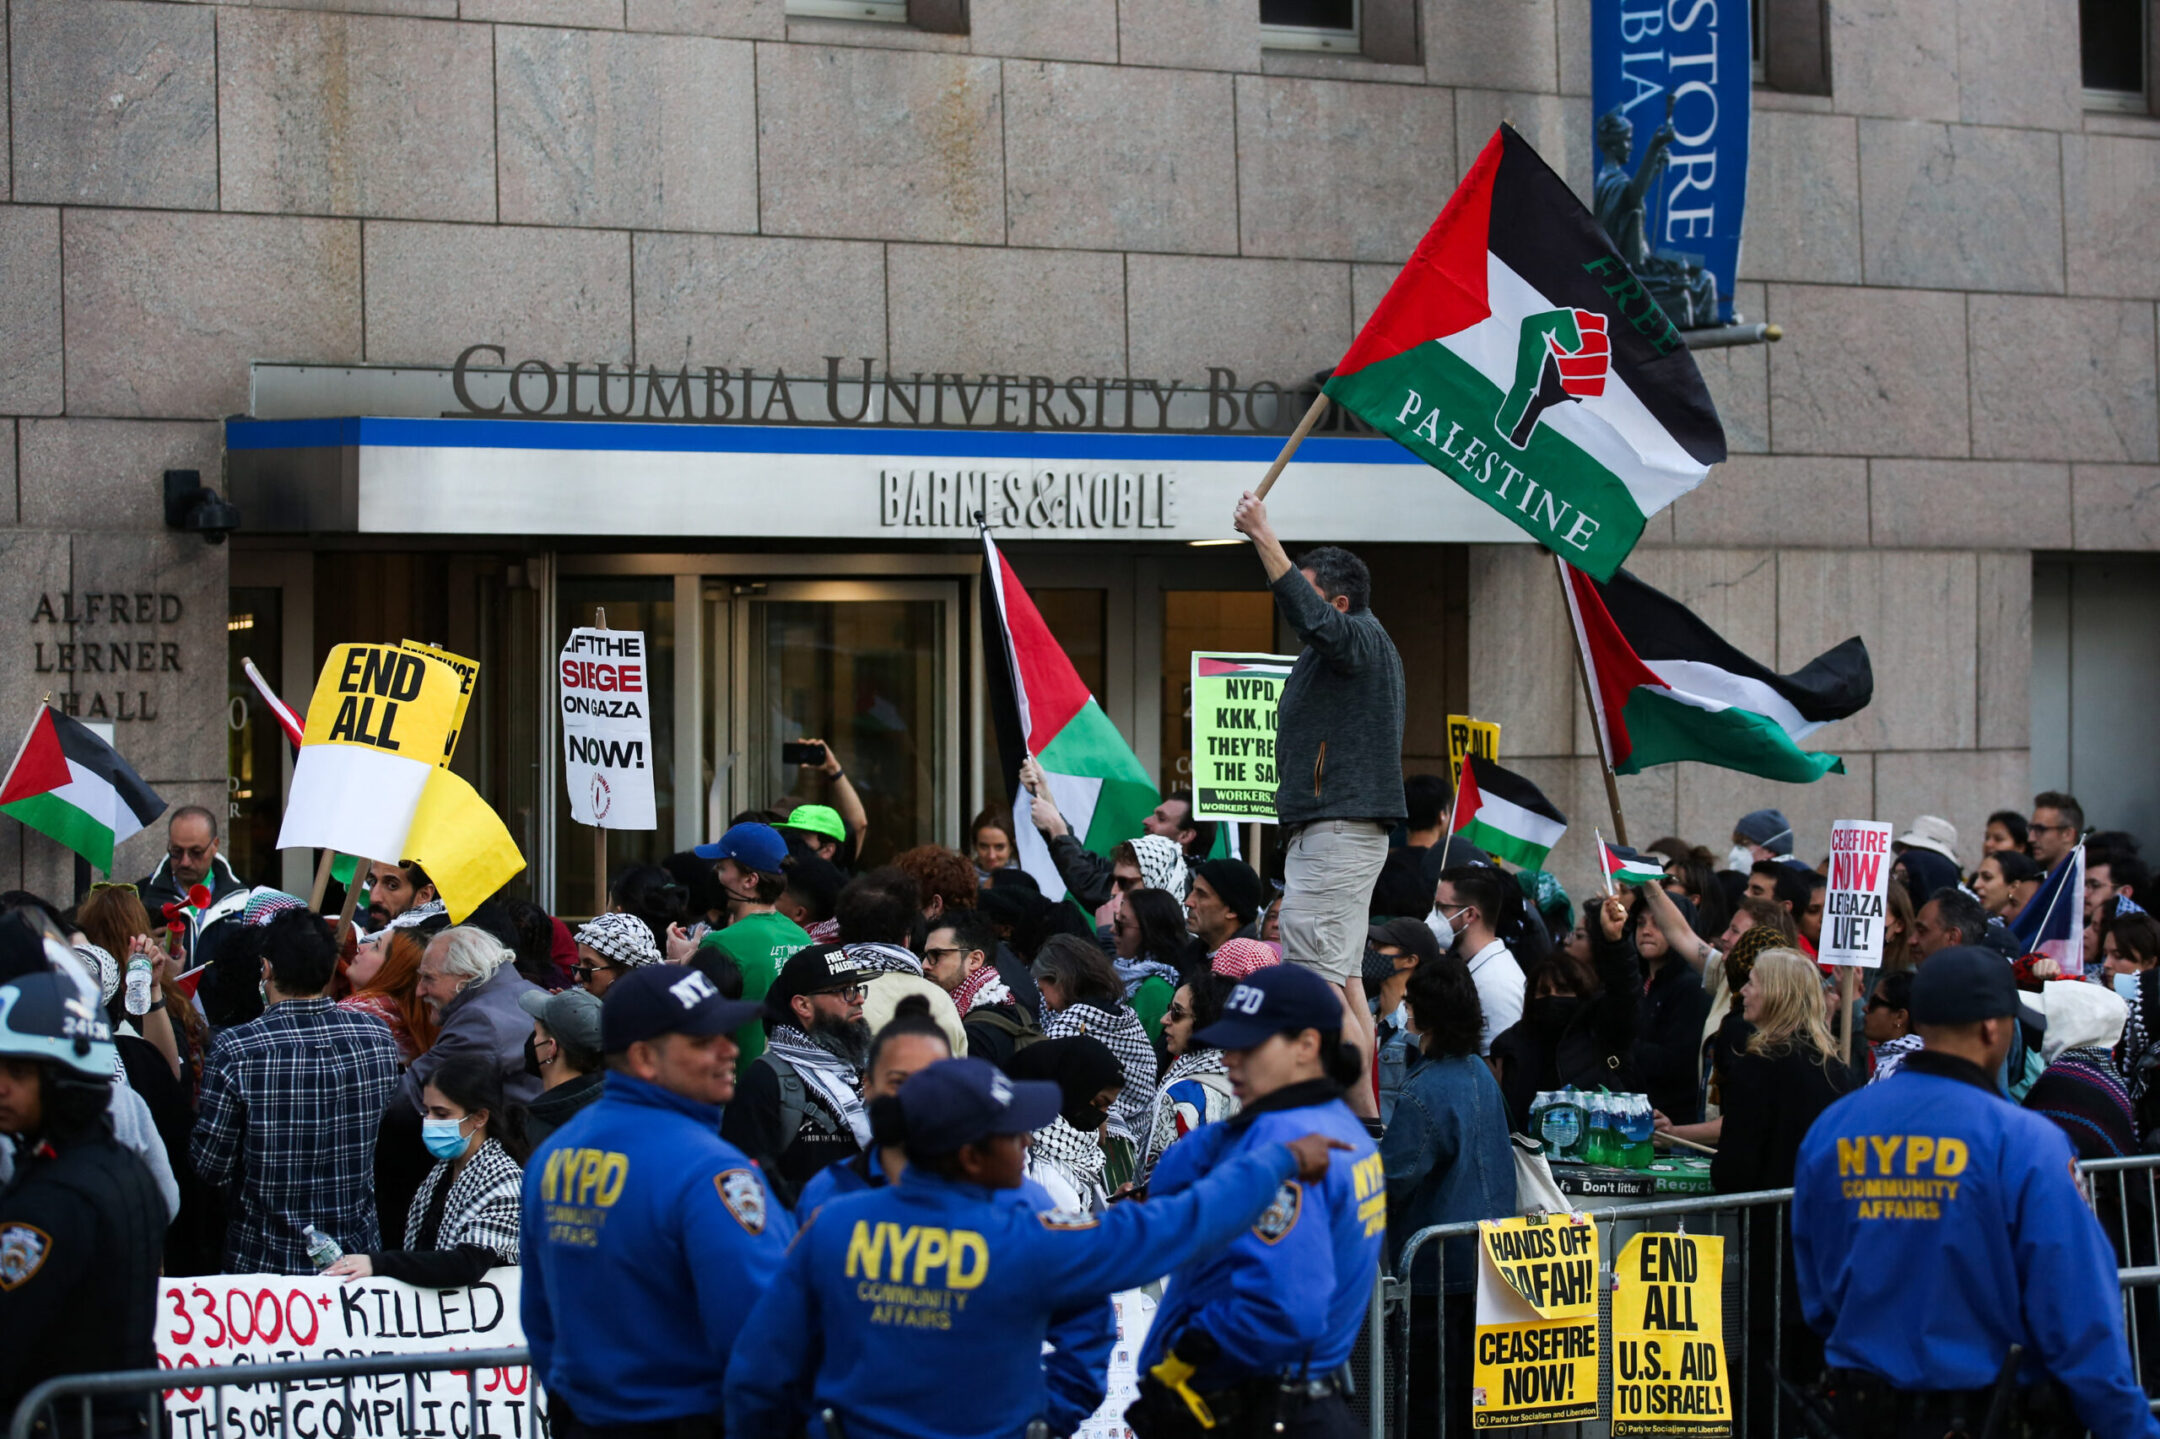 Rabbi at Columbia U urges Jewish students to leave as pro-Palestinian protests continue to roil campus